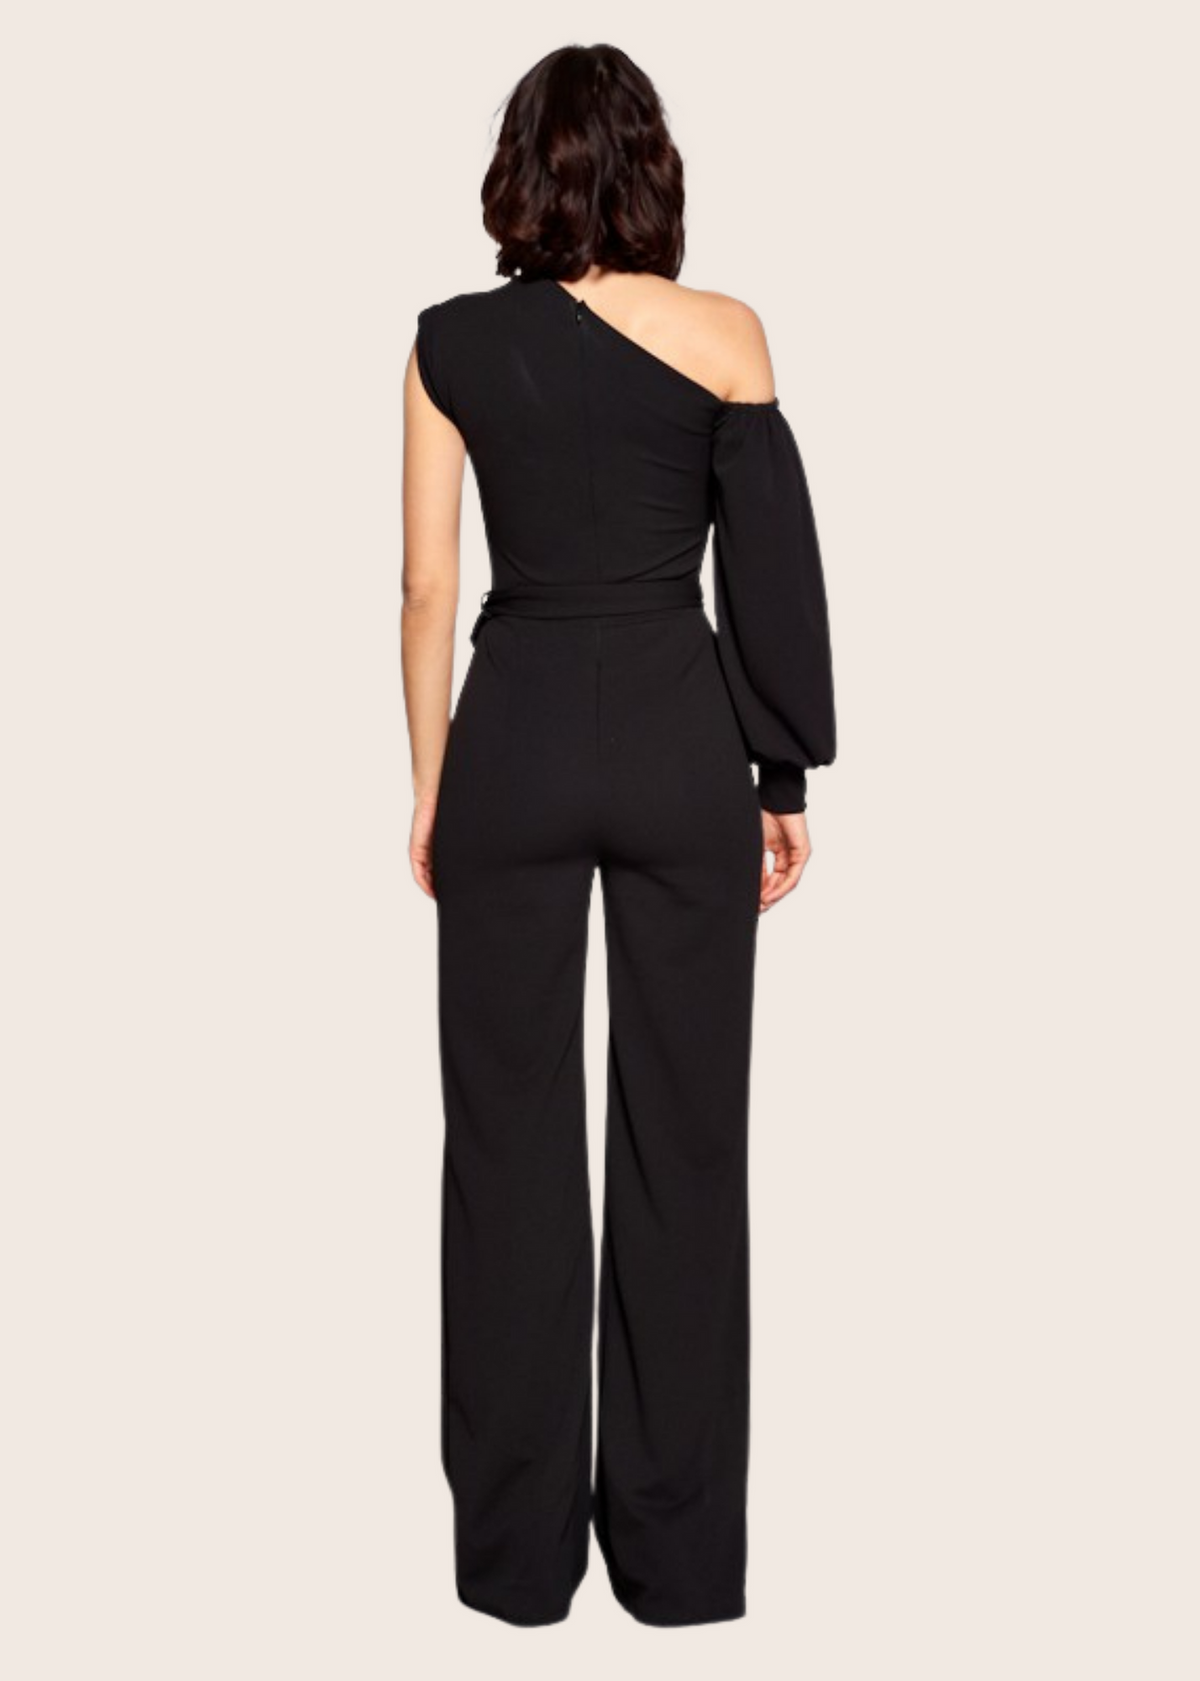 Midnight One Shoulder Long Sleeve Tie Front Long Jumpsuit